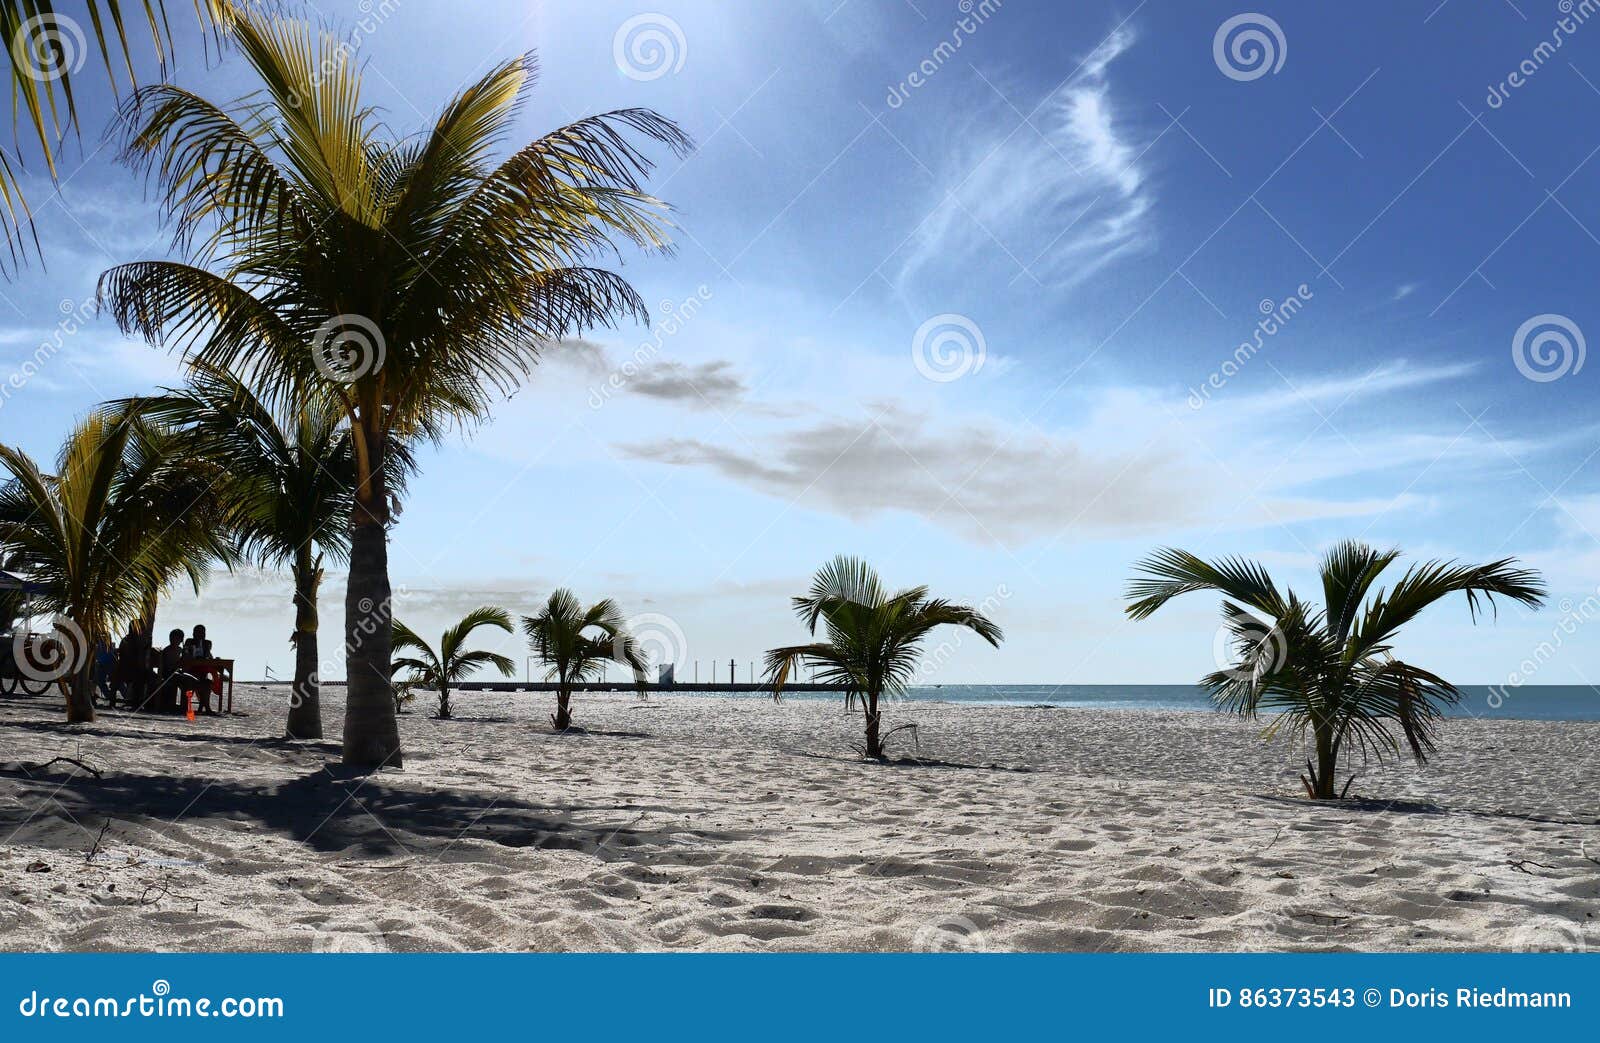 Beach and Ocean Panoramic Summer Holiday Mexico Stock Image - Image of